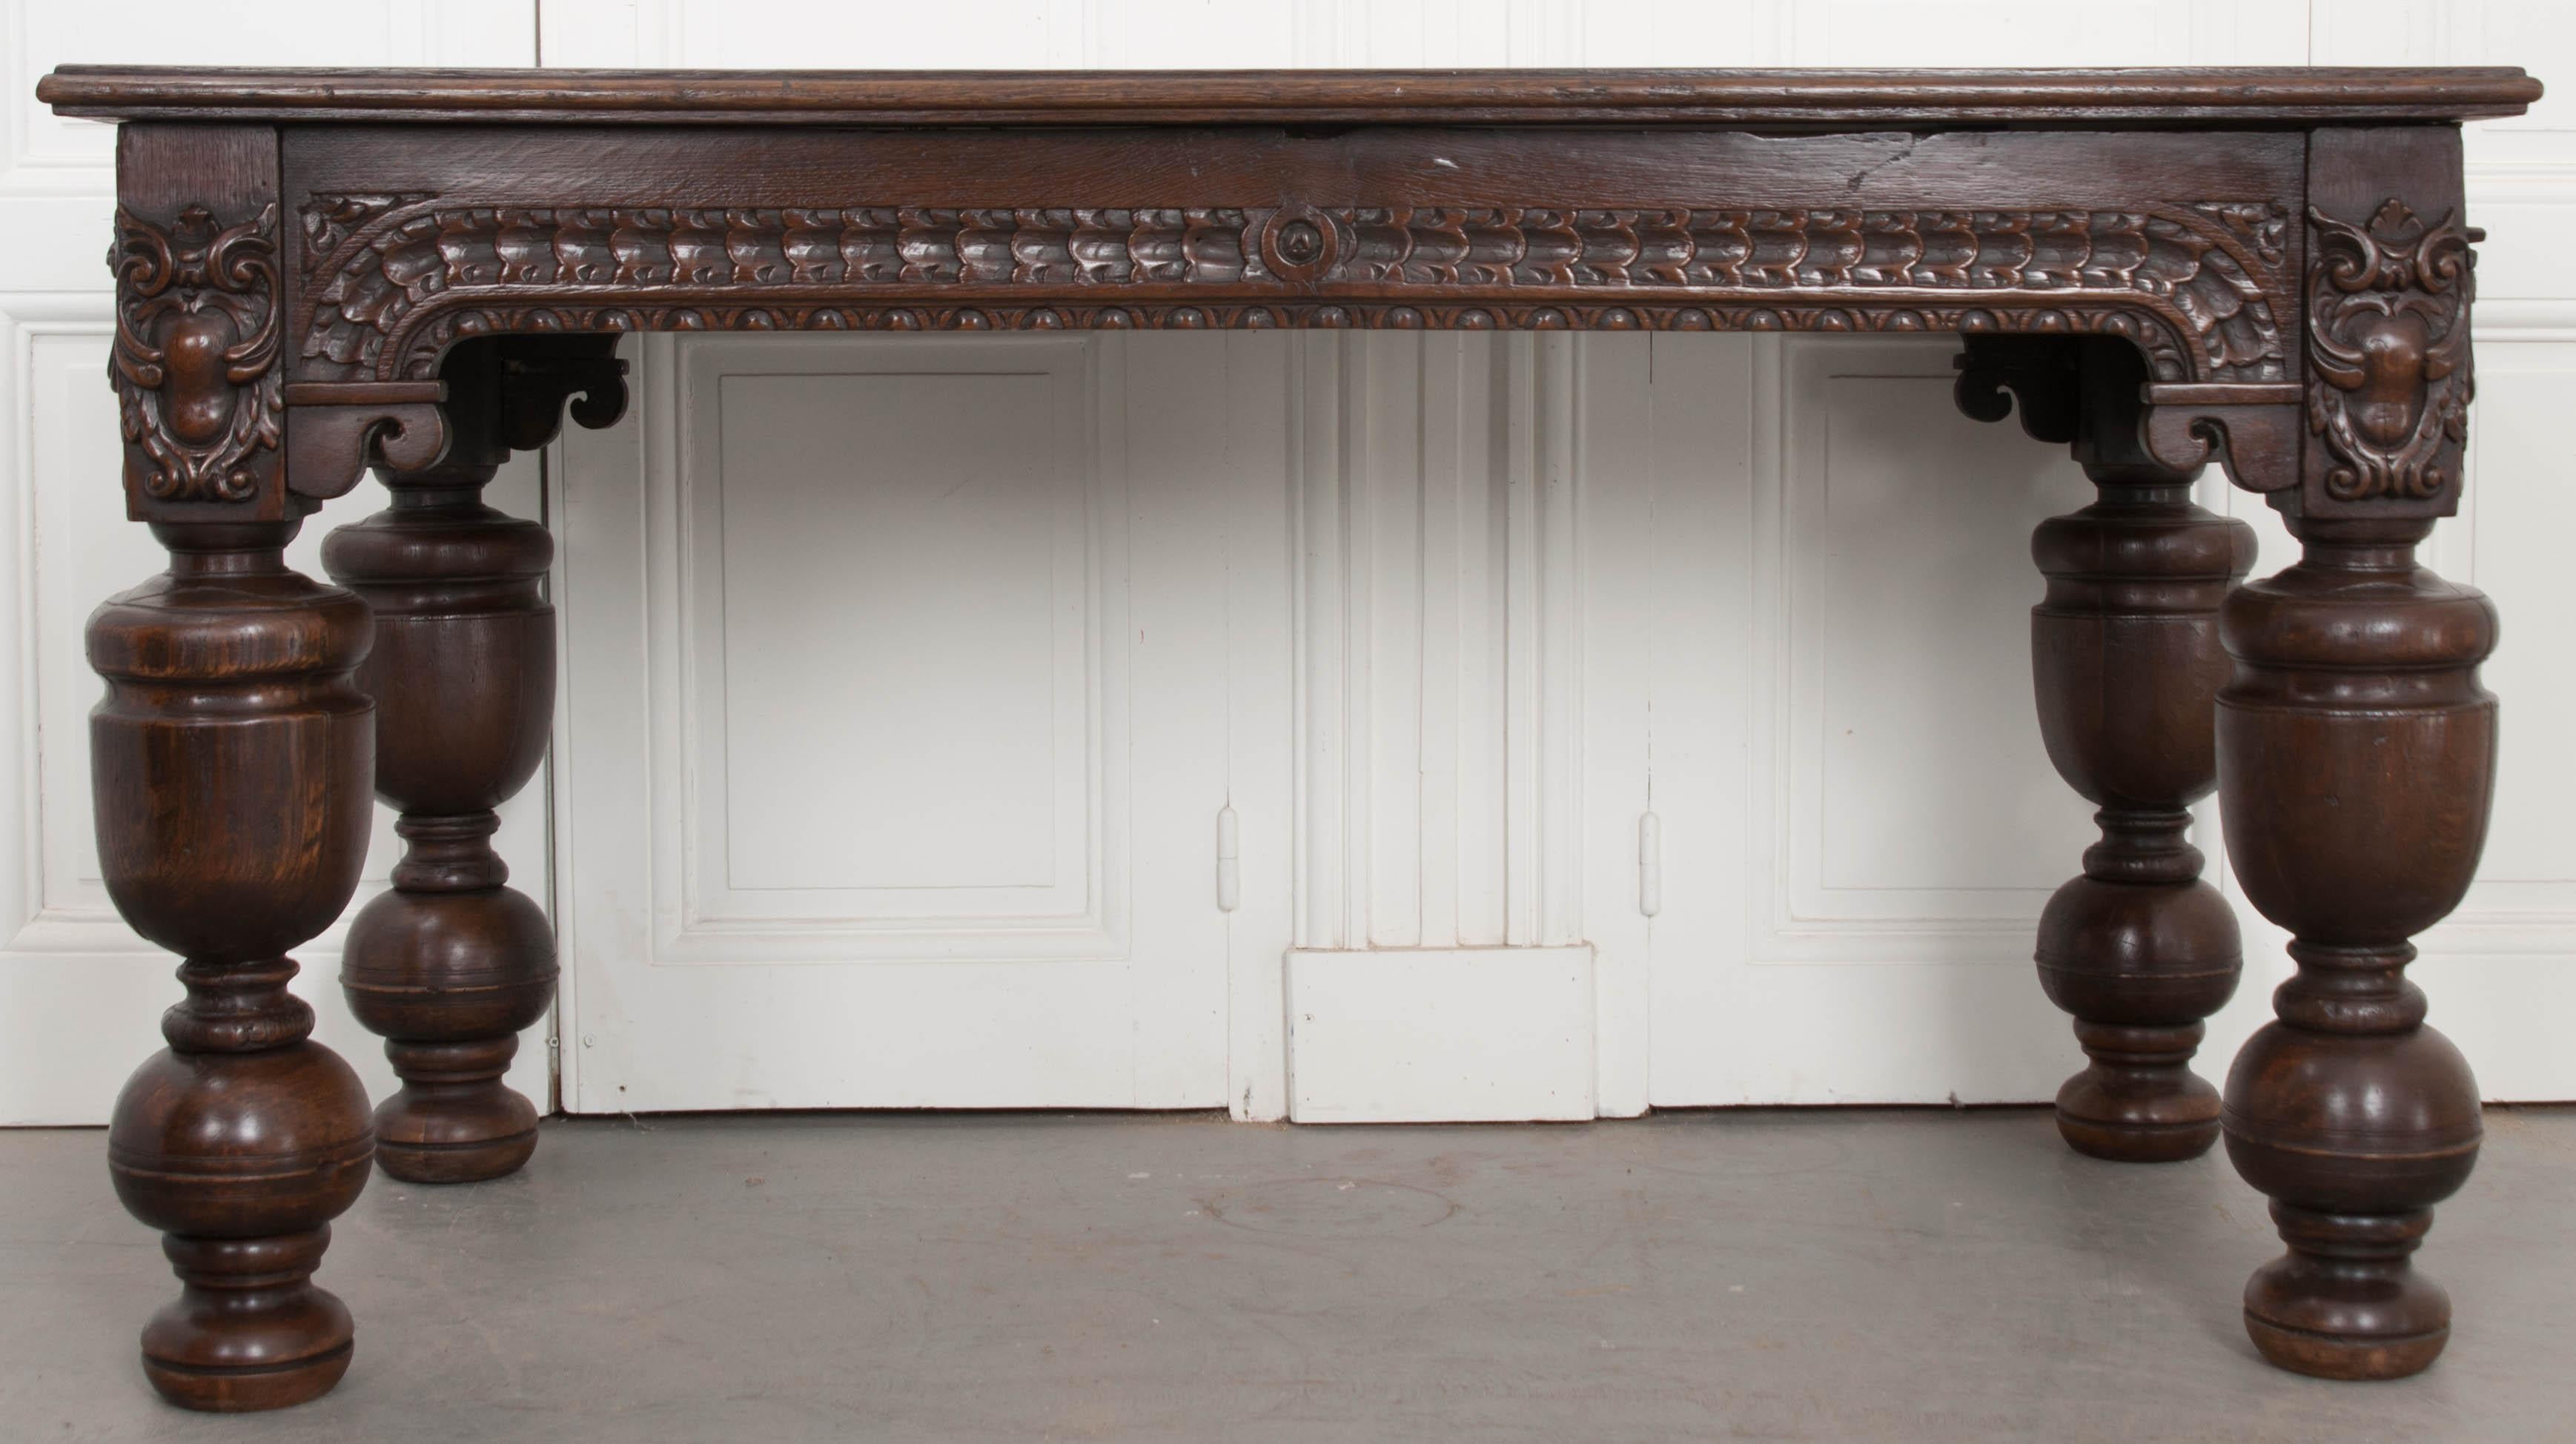 This substantial oak table was carved by hand in France, circa 1750. The table’s apron features exceptionally detailed and extensive ornamentation. Its legs are stocky, done in an exaggerated baluster form, with impressive urn-form turned details.